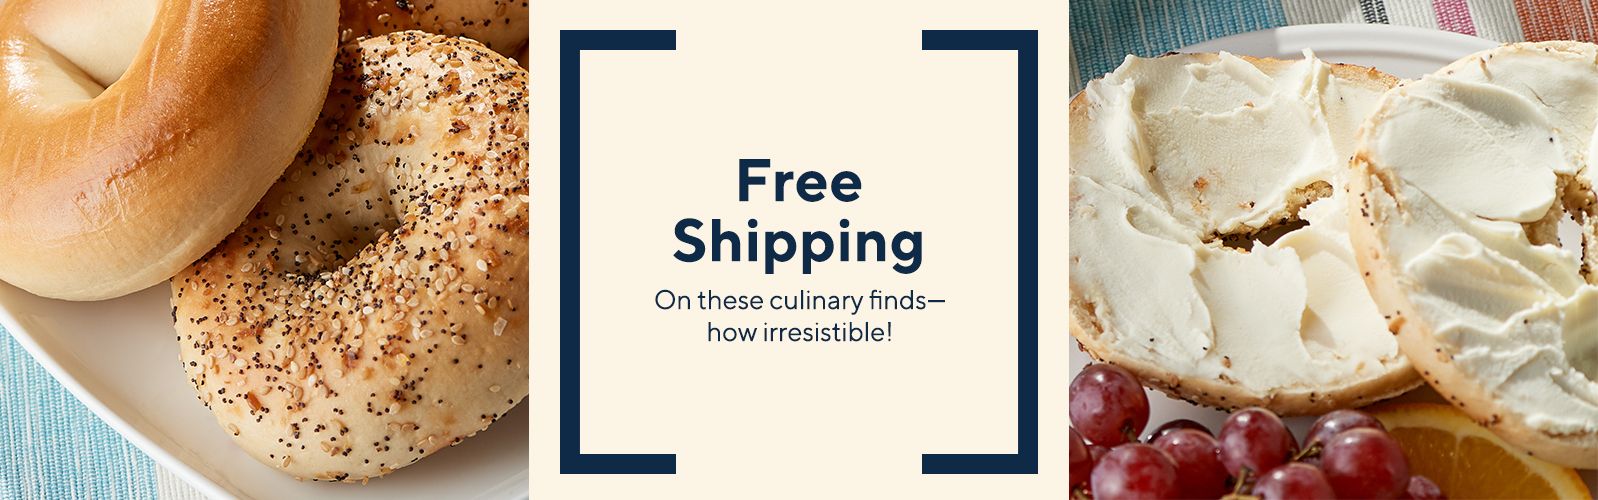 Free Shipping  On these culinary finds—how irresistible!